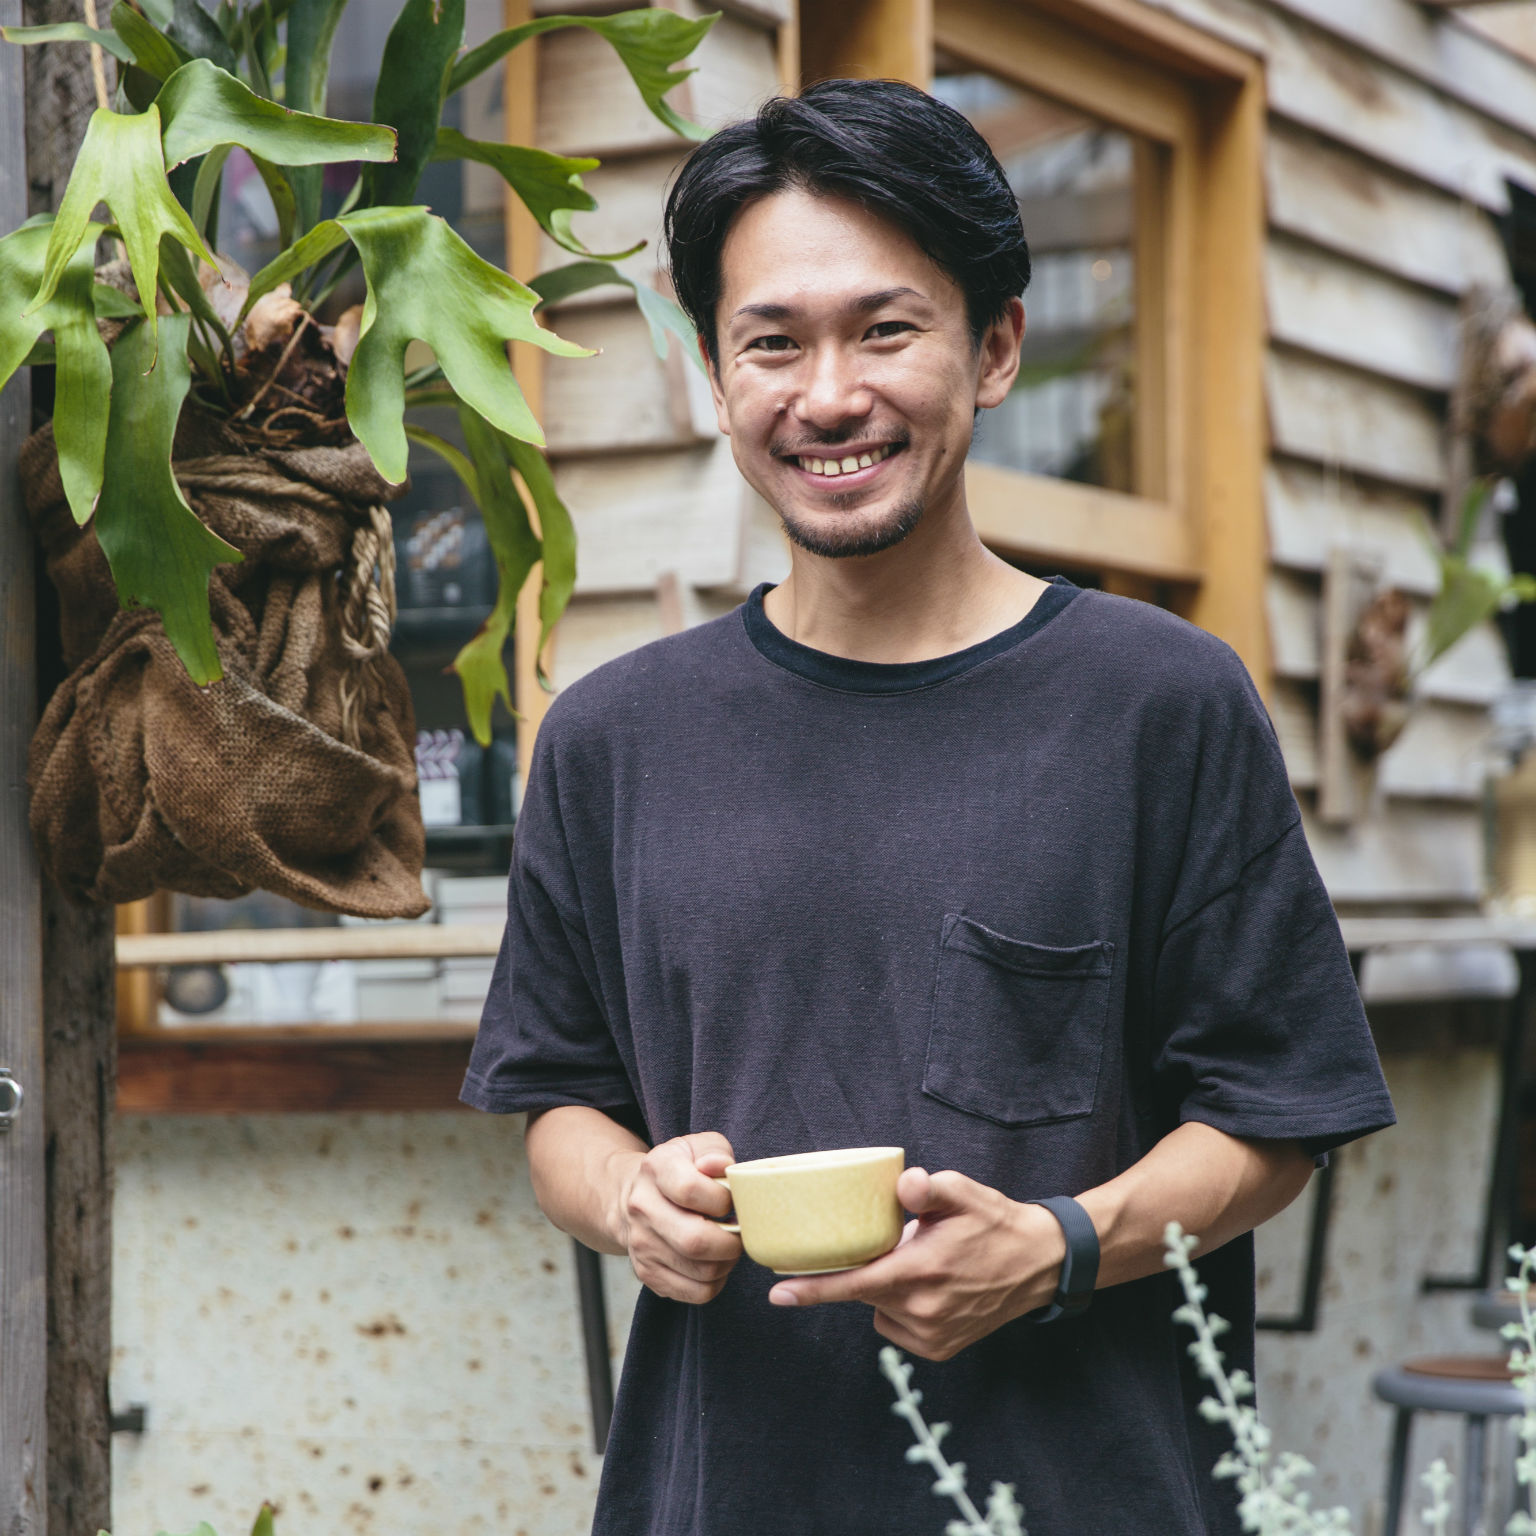 Community-centric coffee shop that values sustainability